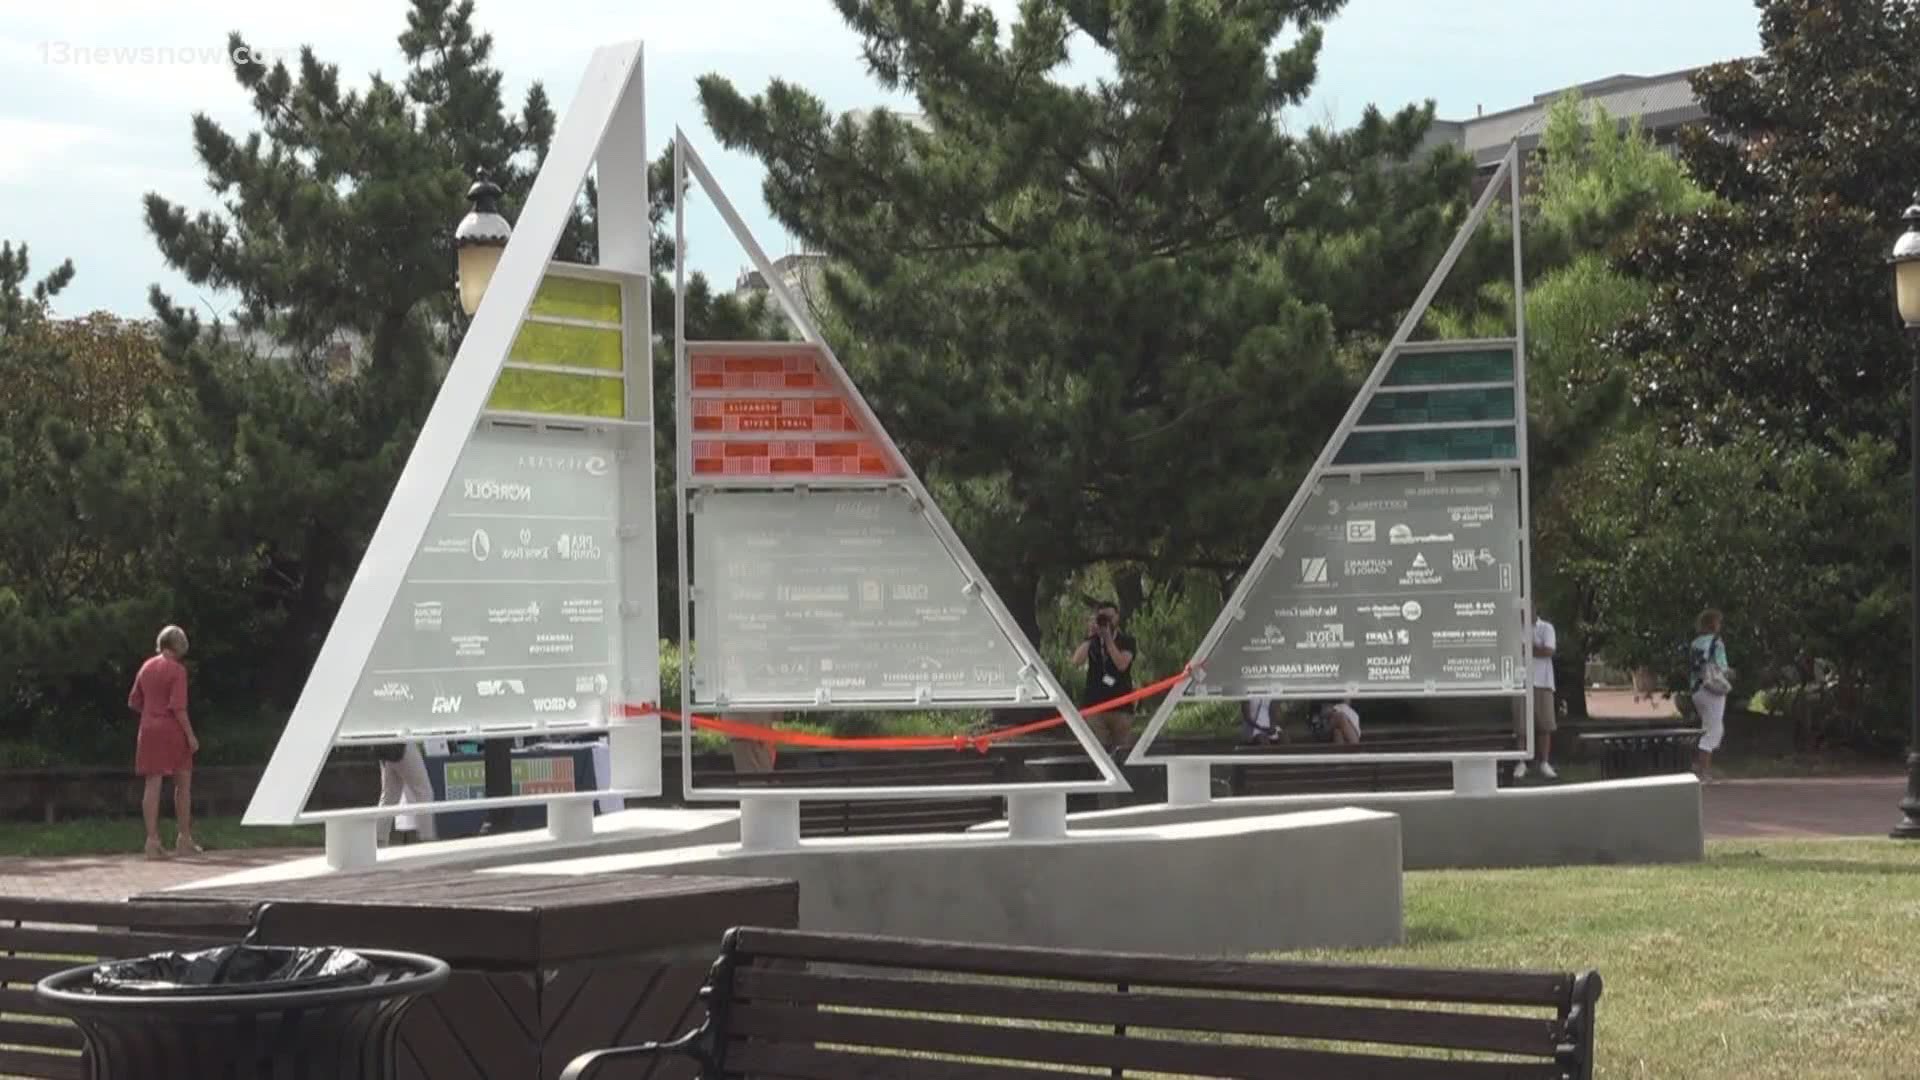 A huge, new sculpture now stands along the Elizabeth River Trail. It features three free-standing sails made of glass and steel.